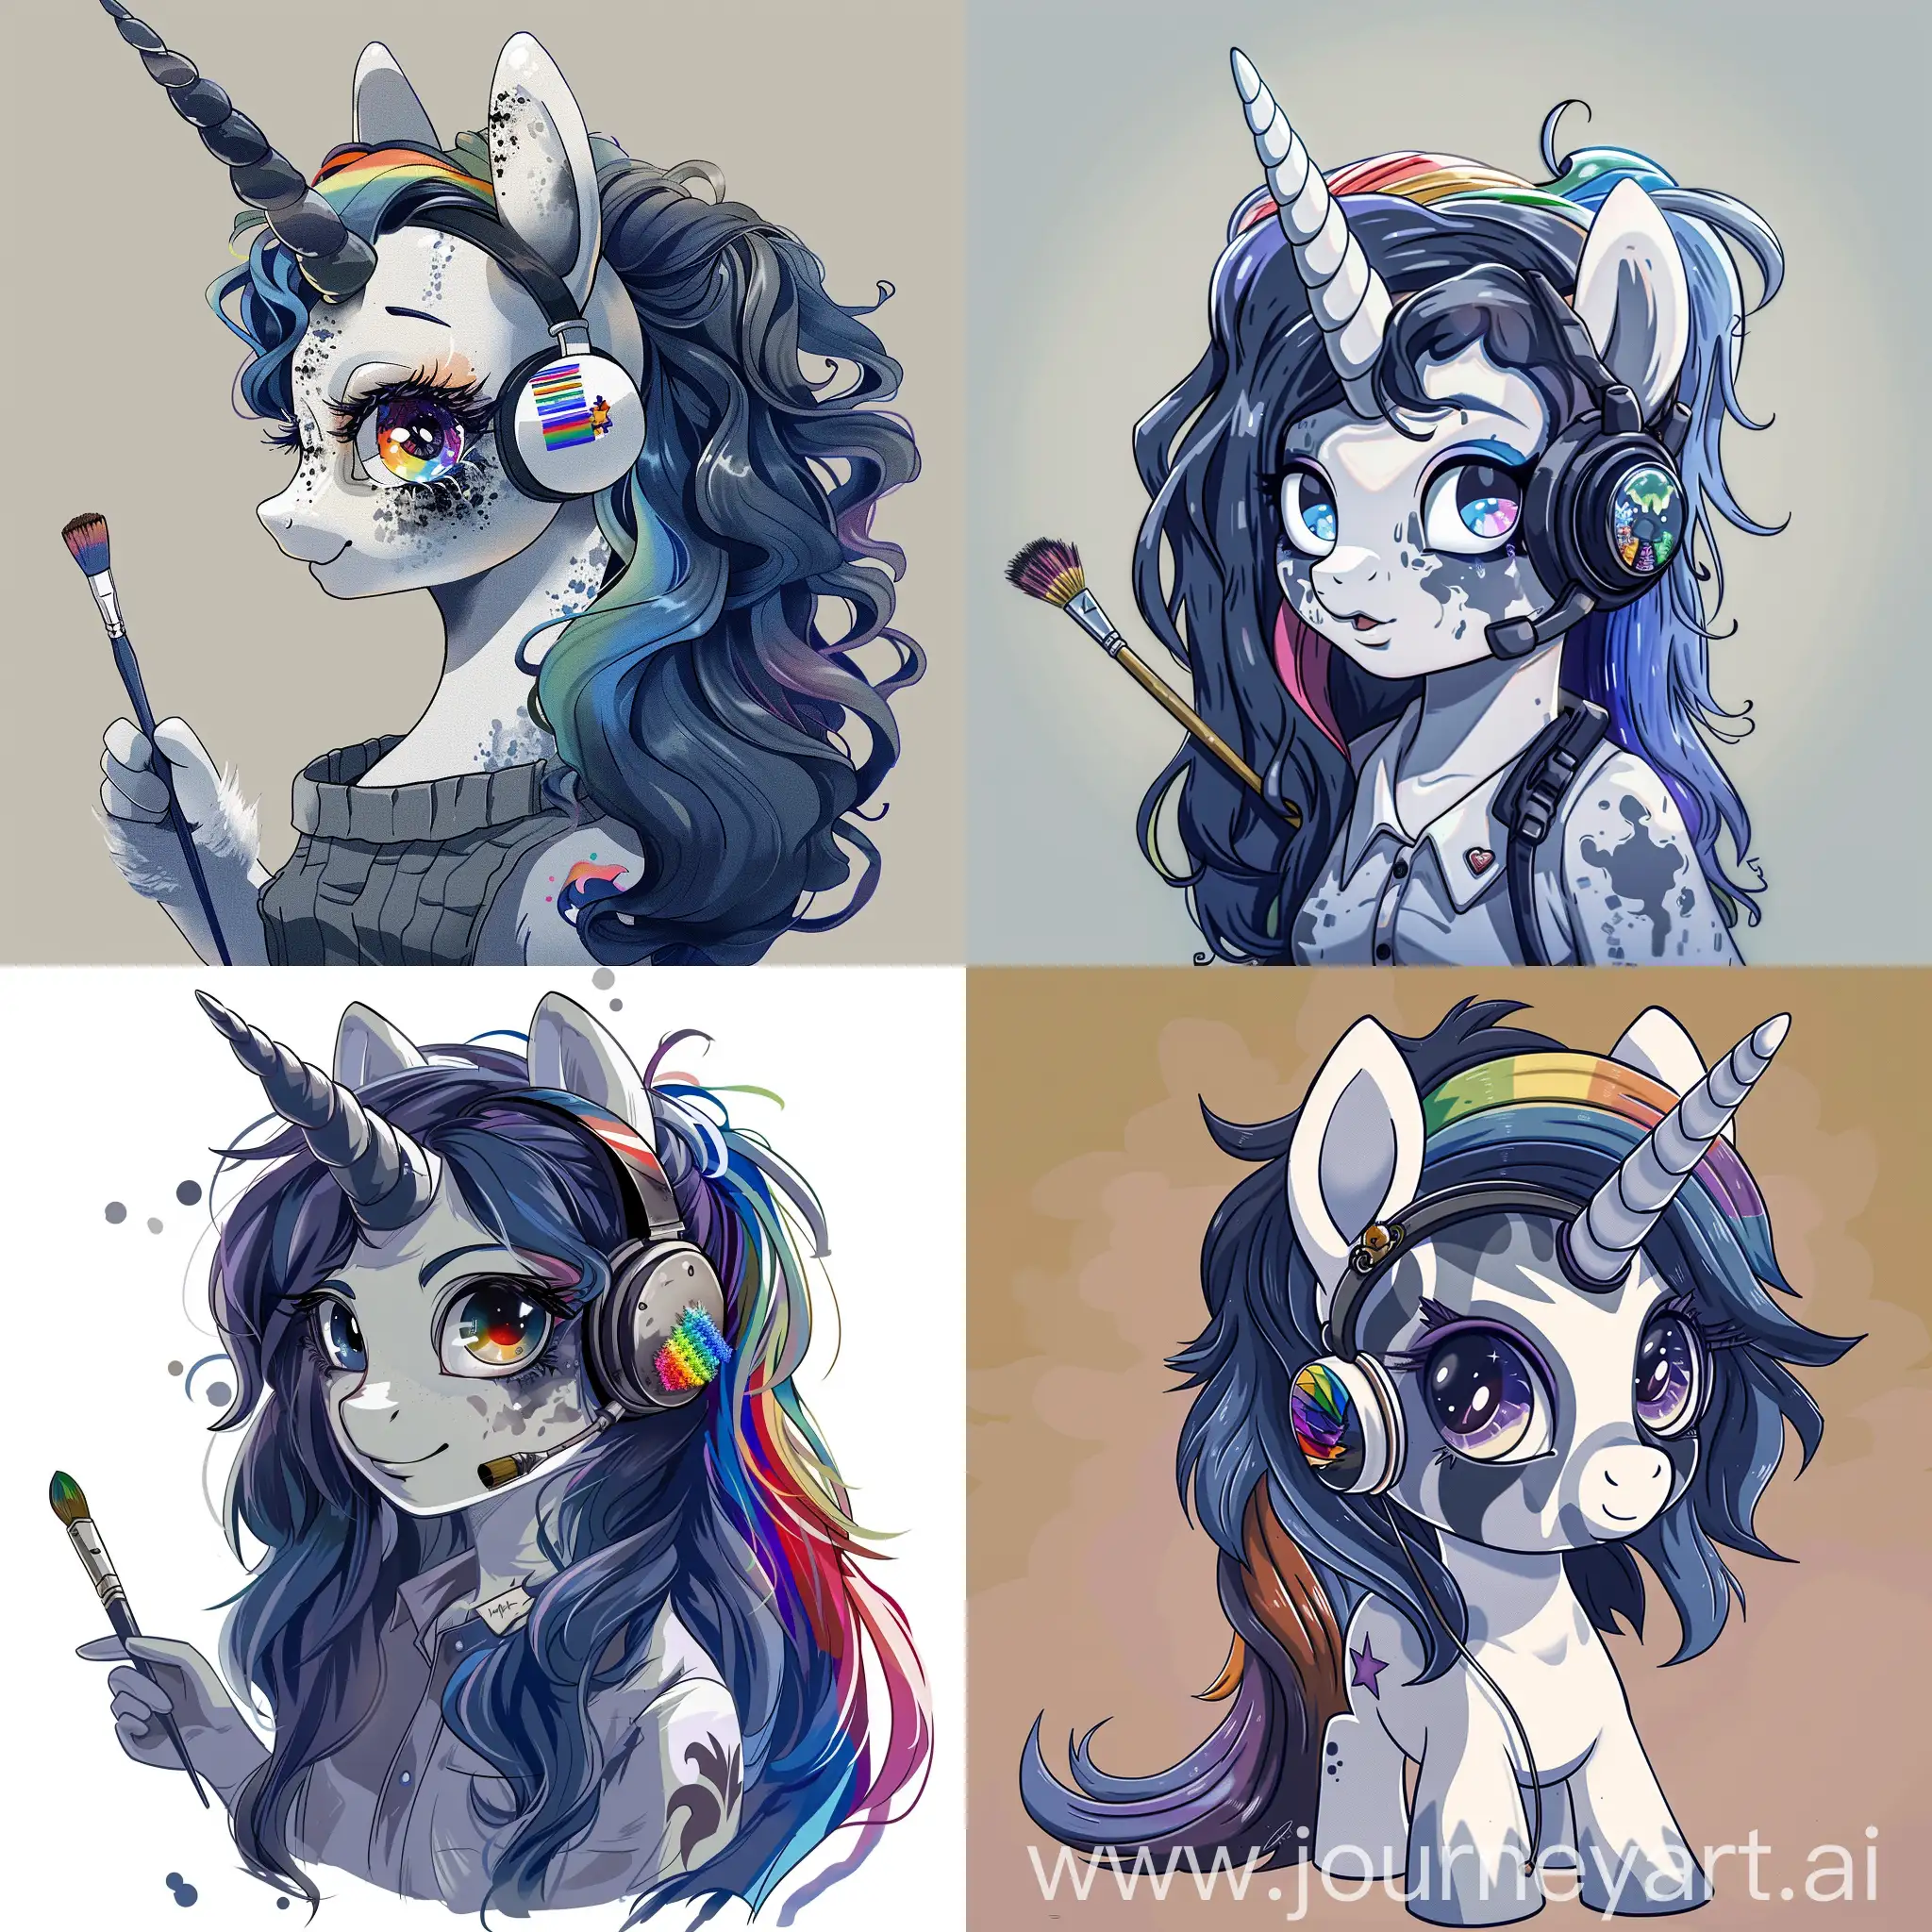 Asexual-MLP-Alicorn-Pony-in-FullBody-Fanart-with-Rainbow-Accessories